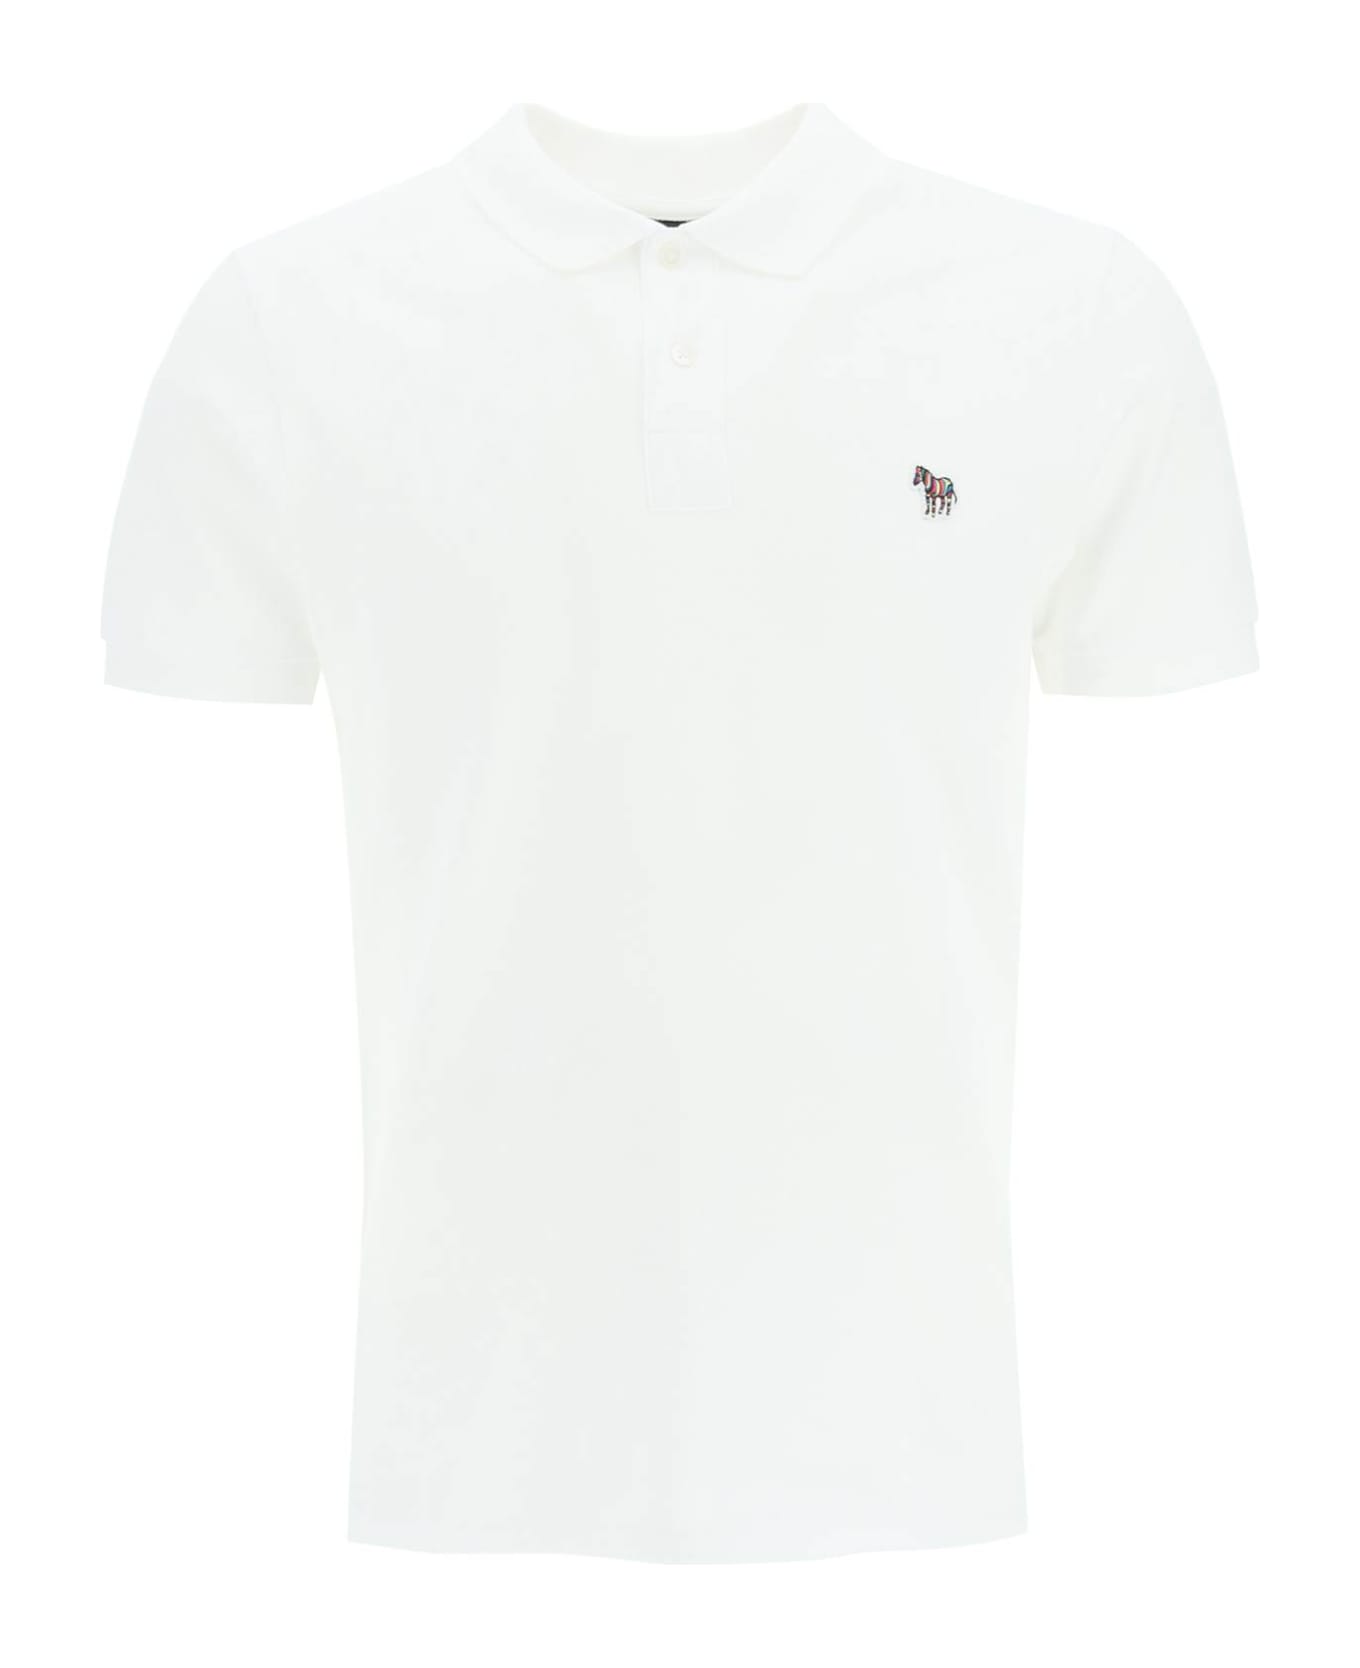 PS by Paul Smith Organic Cotton Slim Fit Polo Shirt - WHITE (White)